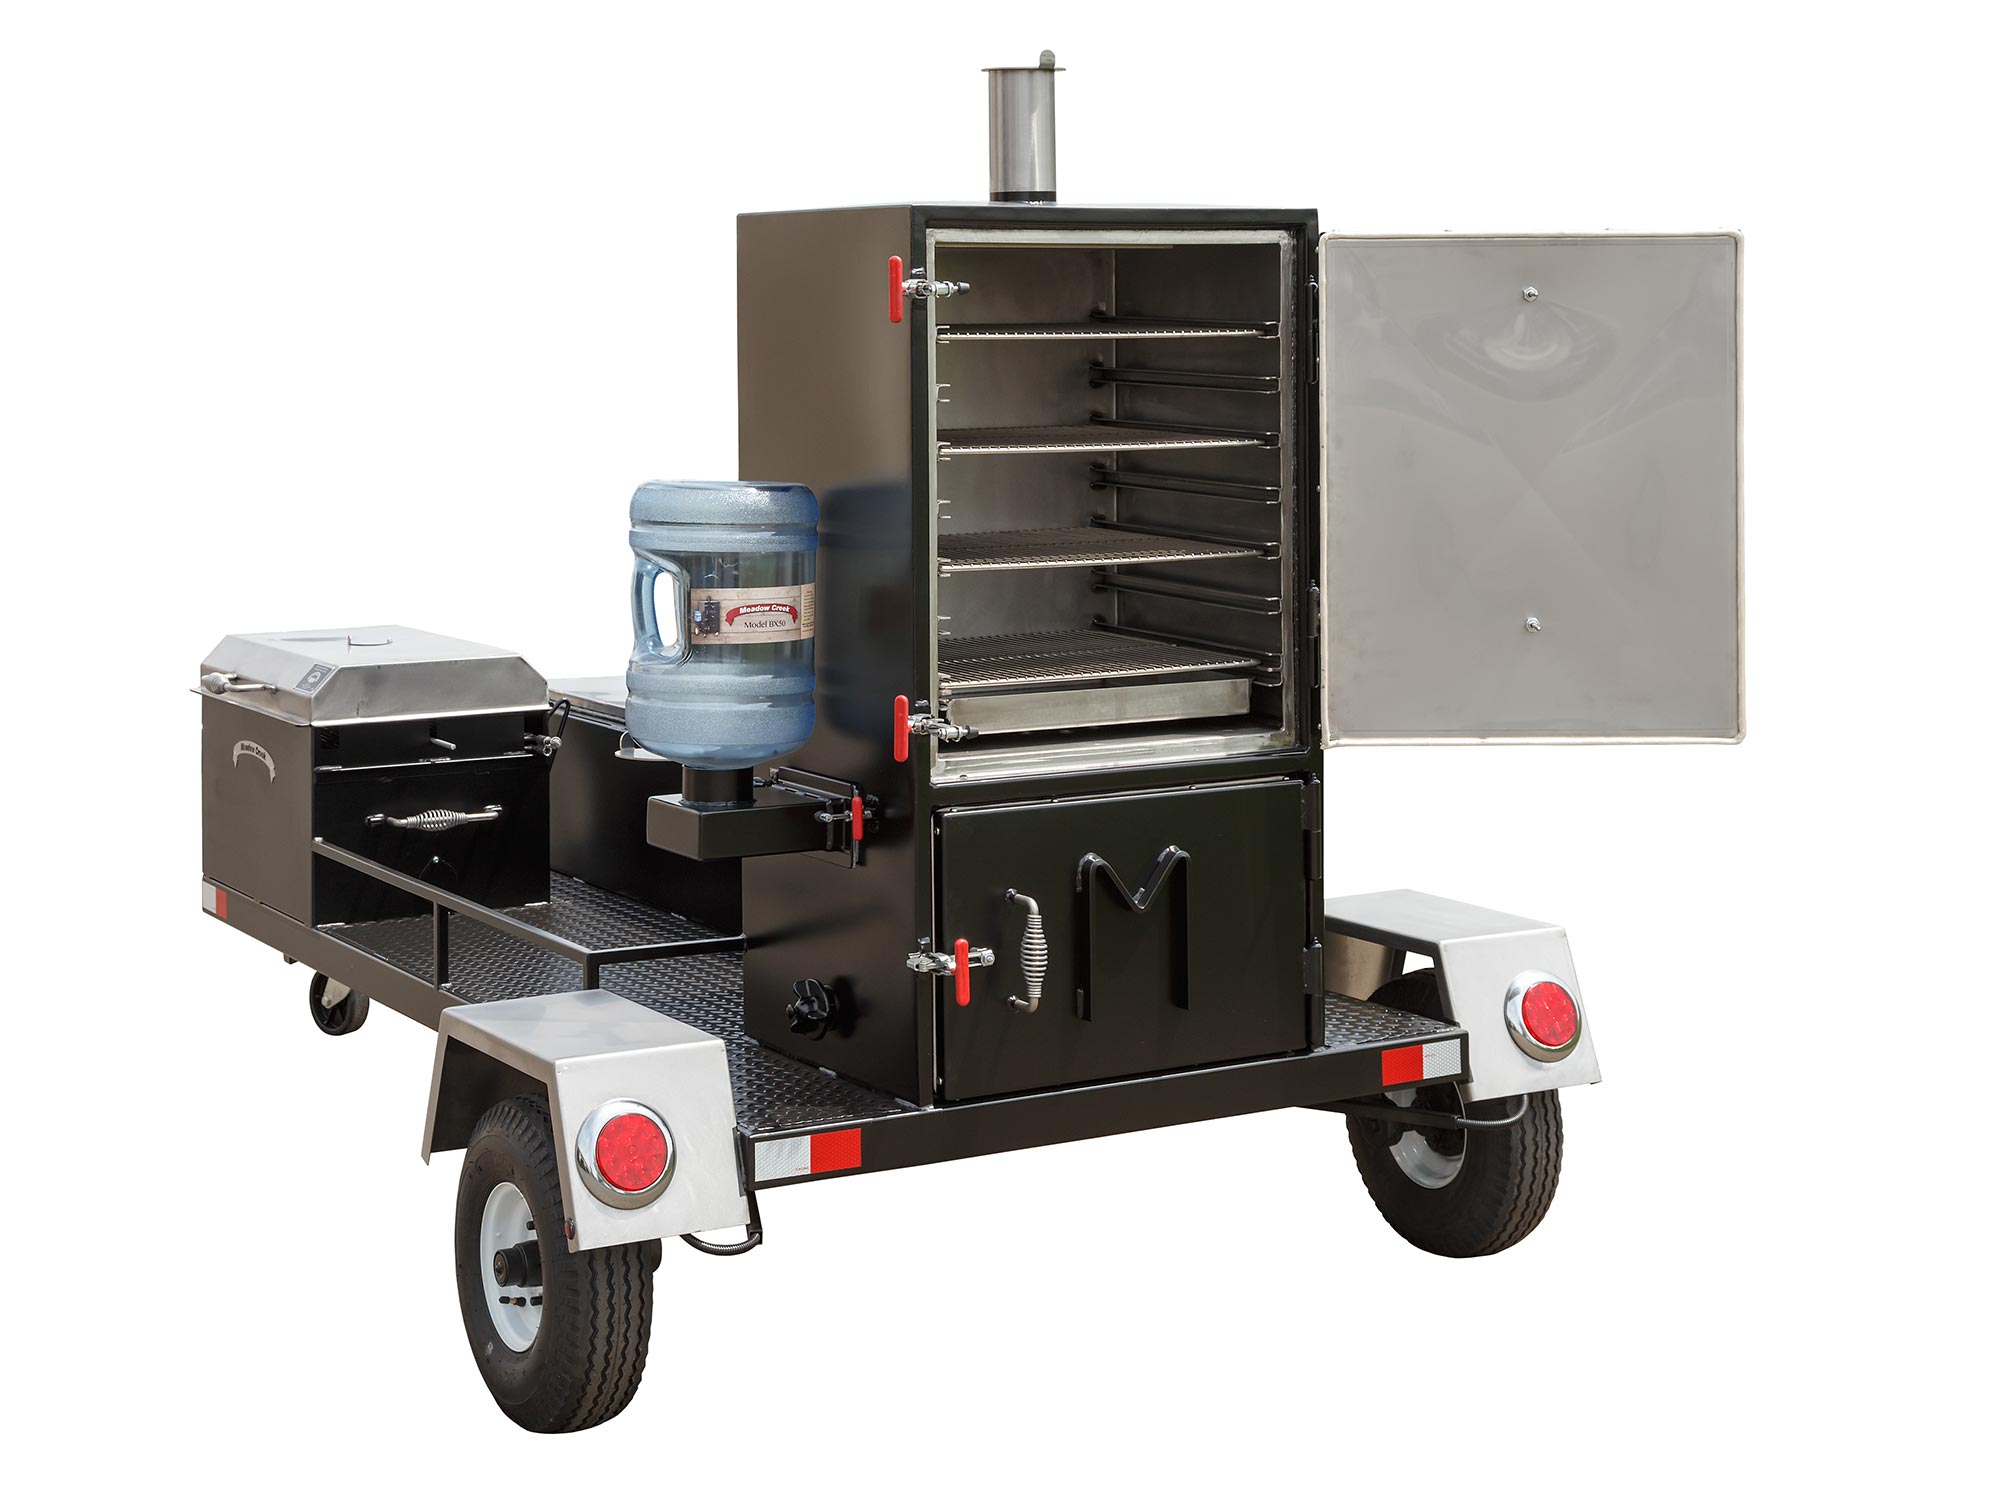 BX50T Box Smoker Trailer with Optional BBQ26 Chicken Cooker